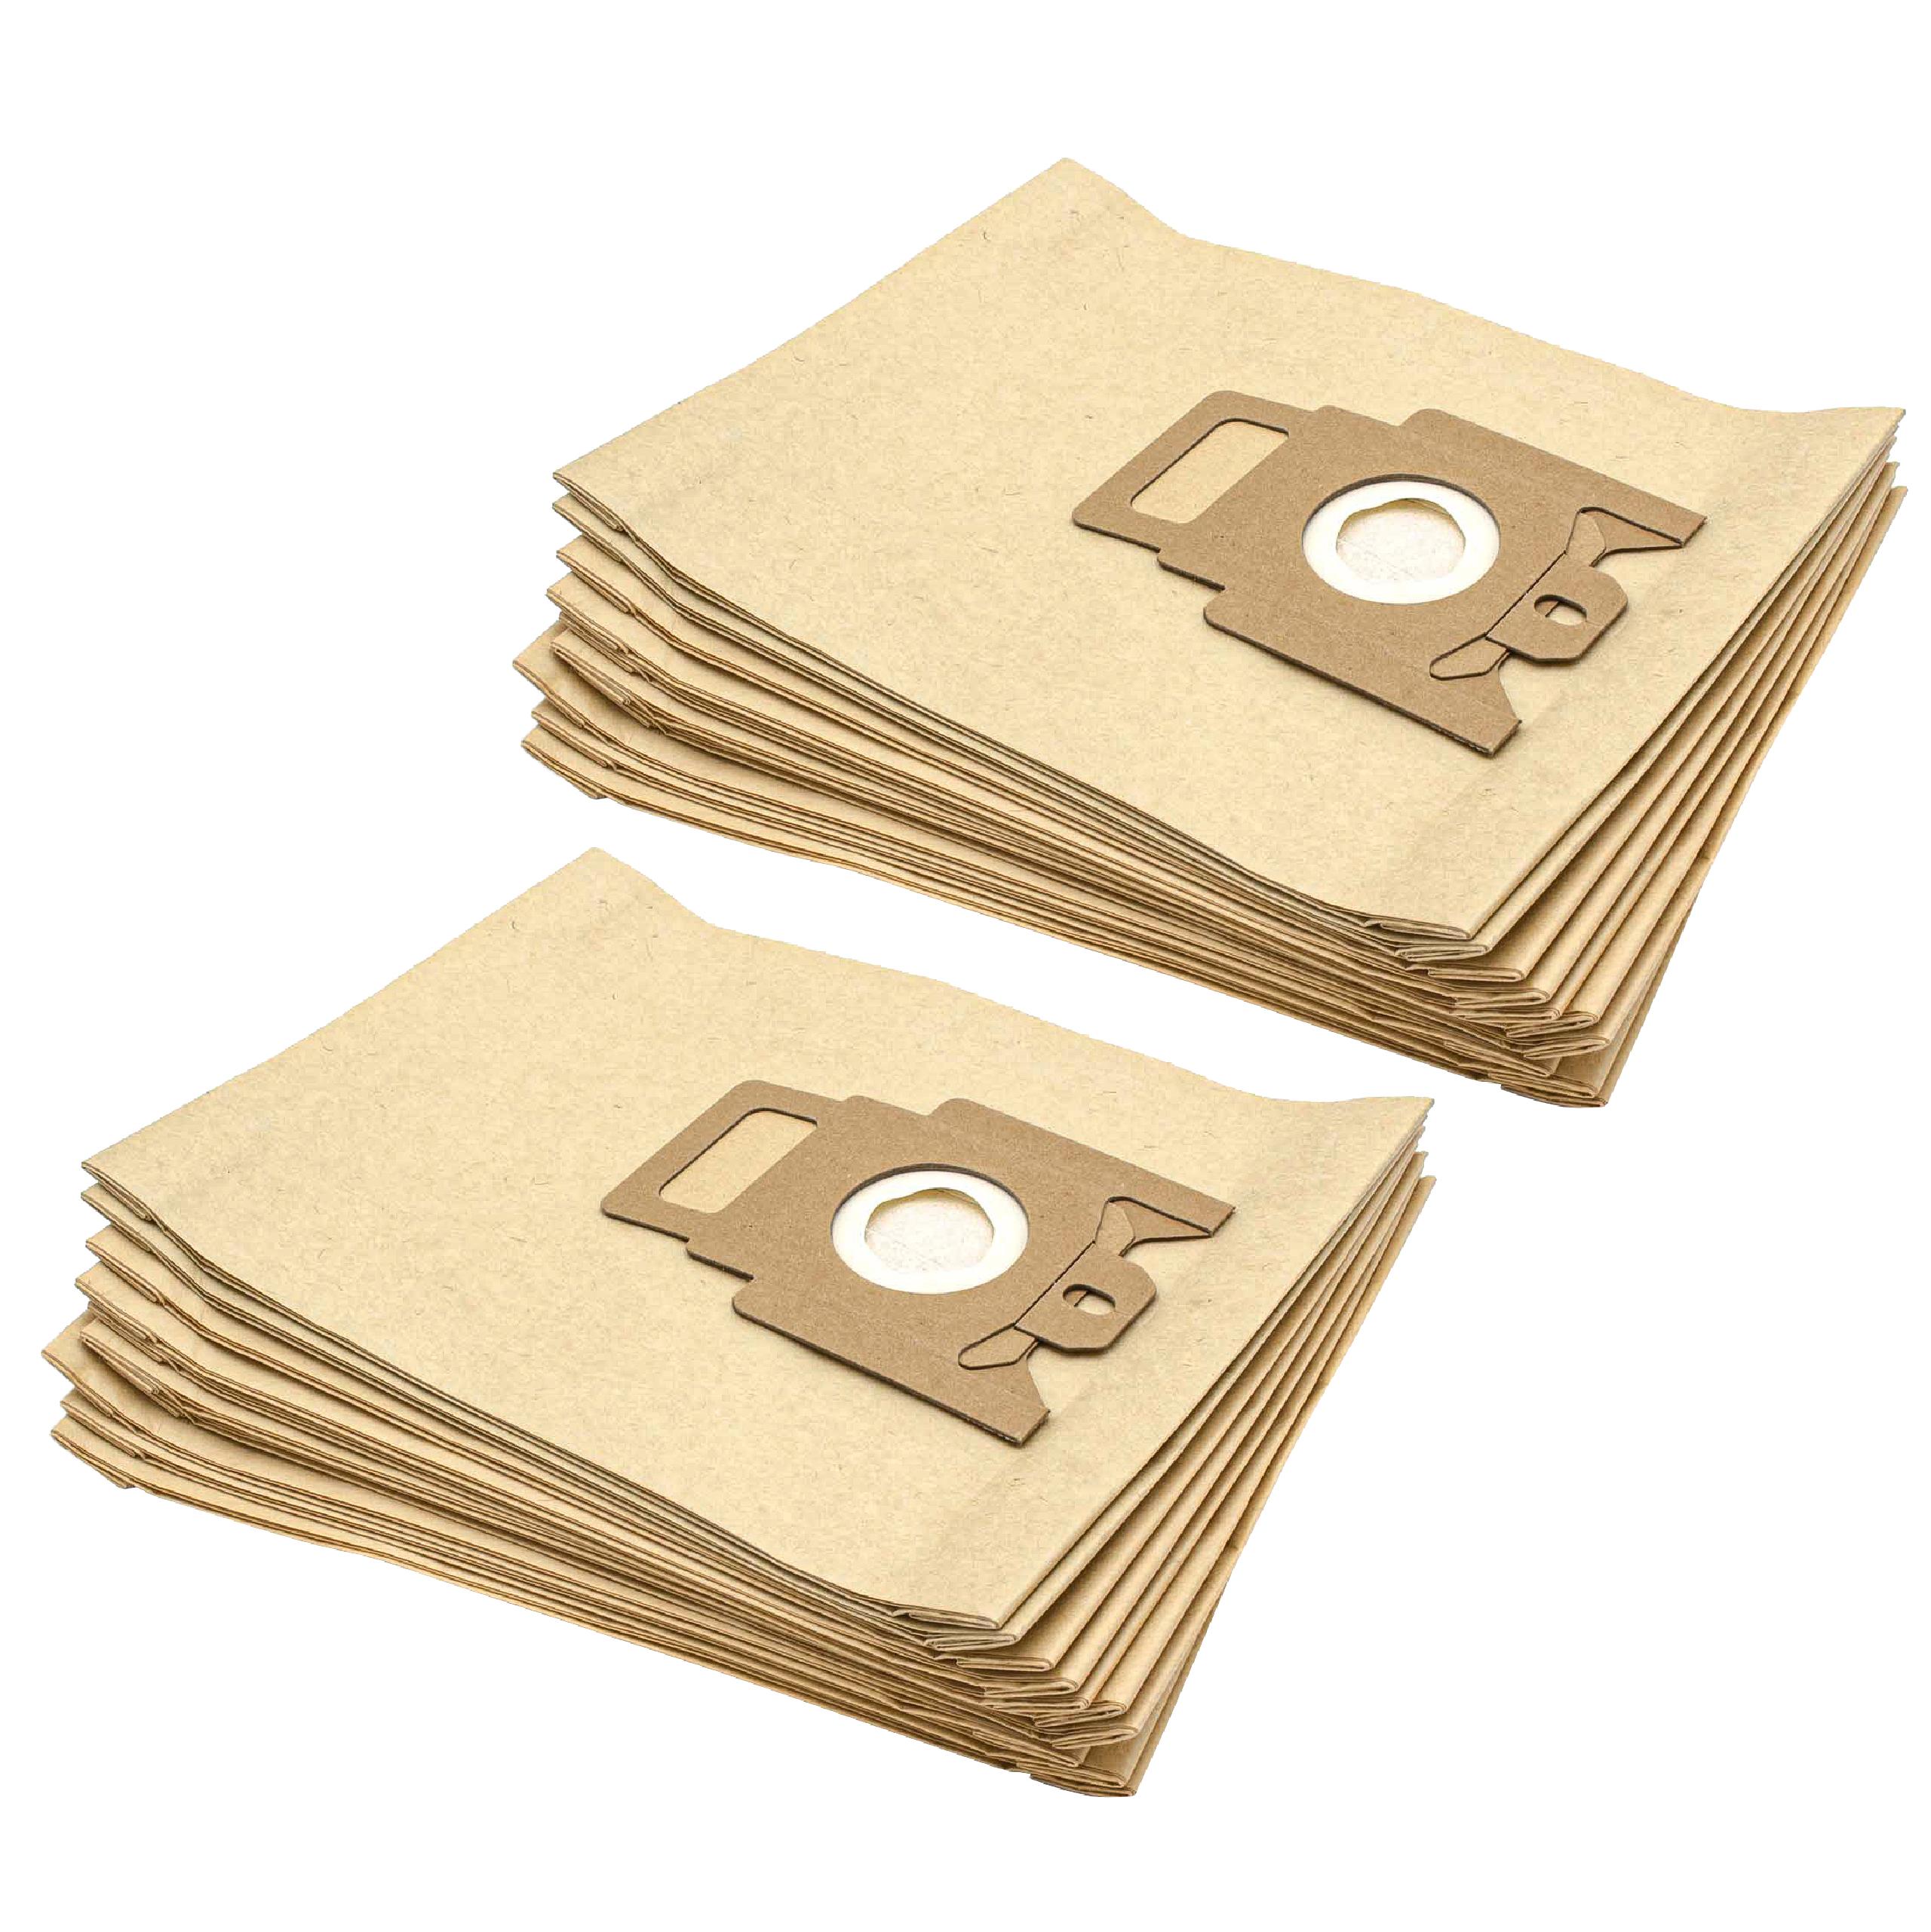 20x Vacuum Cleaner Bag suitable for H22 Hoover, Miele H22 - paper